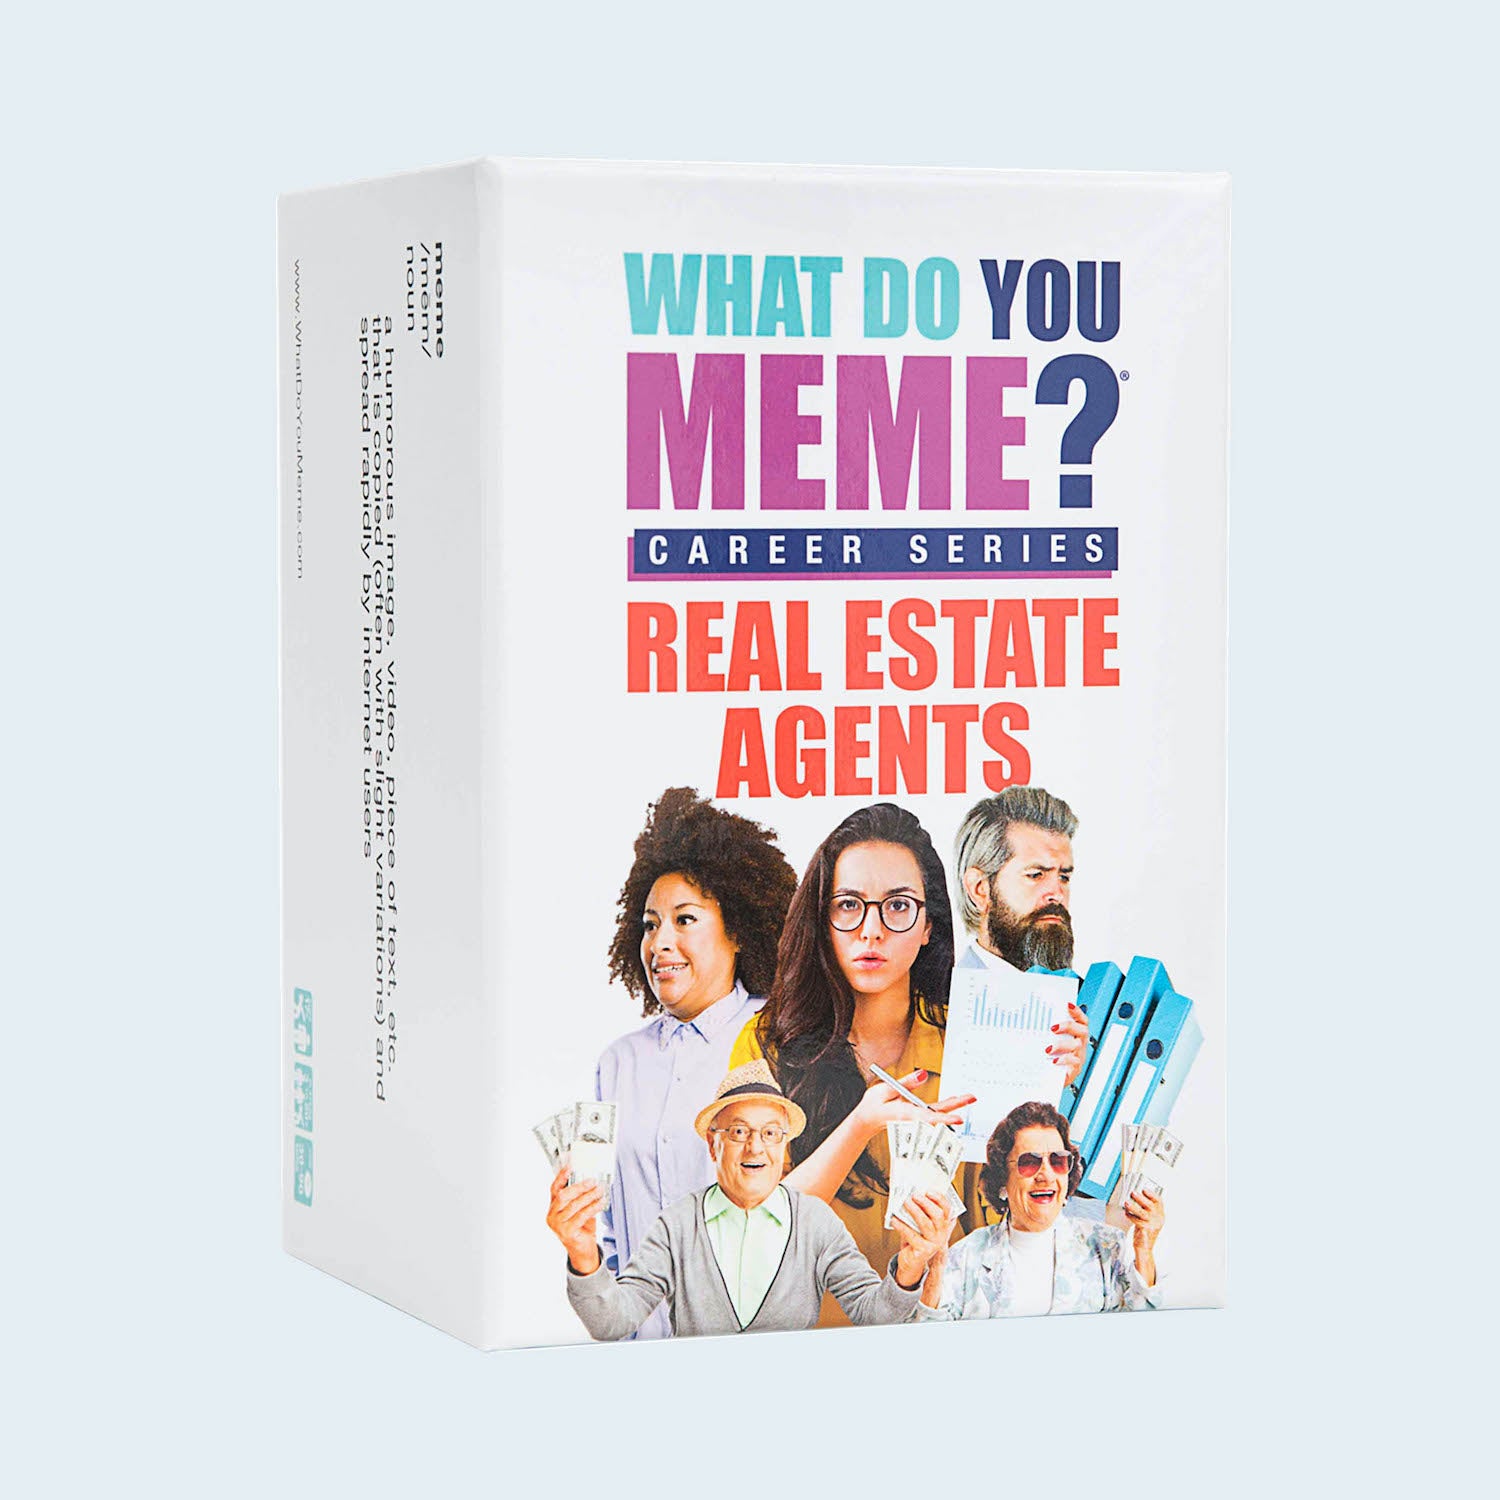 what-do-you-meme-career-series-real-estate-agents-game-box-and-game-play-02-what-do-you-meme-by-relatable